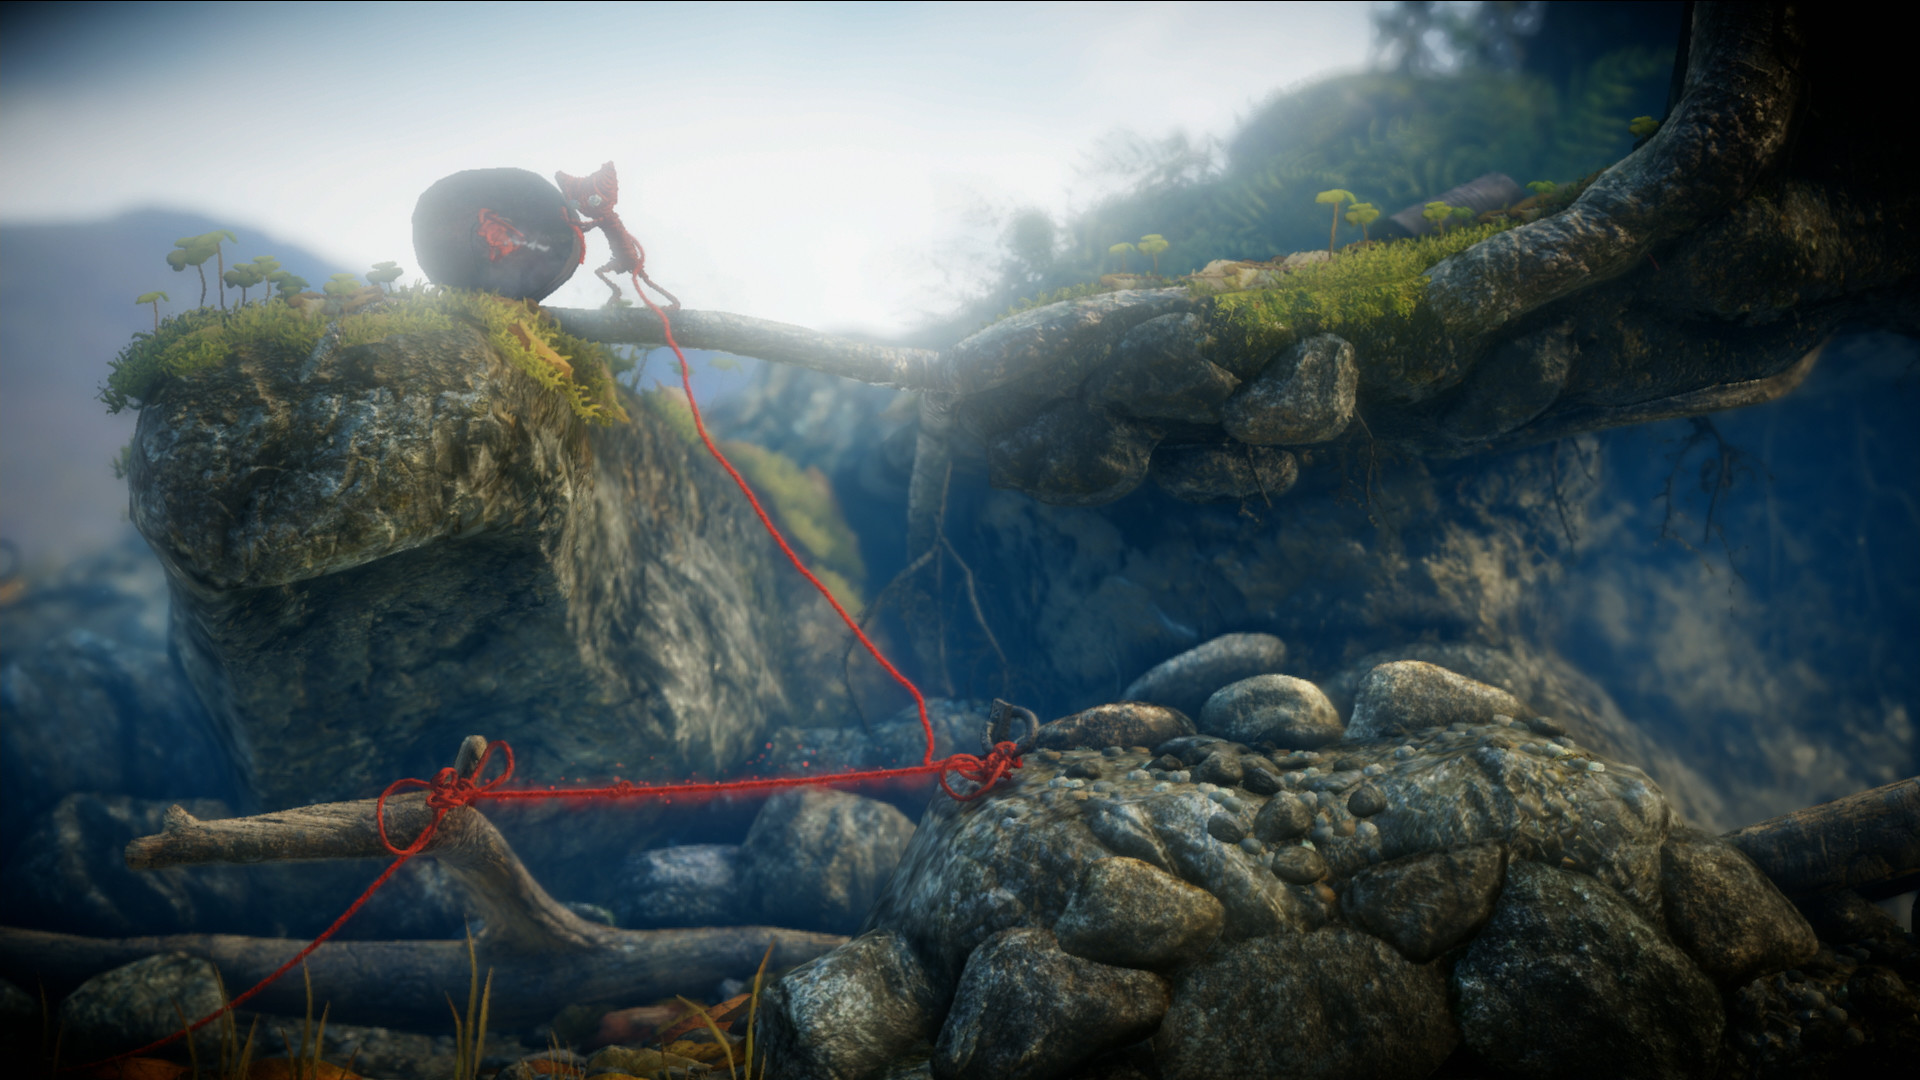 Unravel Gets A Free Demo  Electronic art, Video game reviews